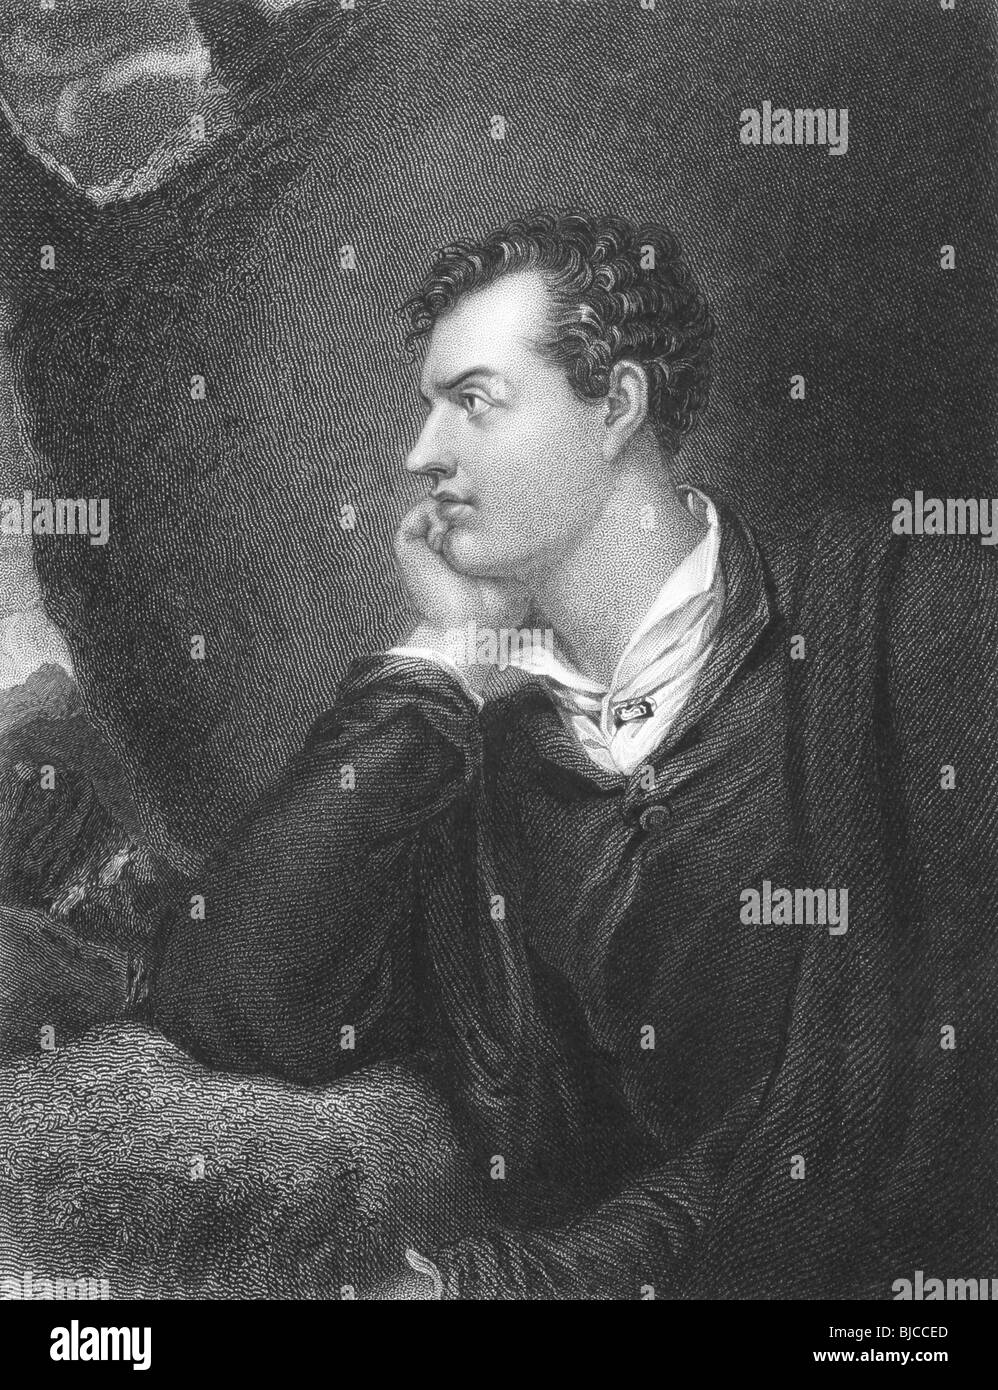 Lord Byron (1788-1824) on 1800s engraving. One of the greatest British poets & leading figures in the Greek war of independence. Stock Photo